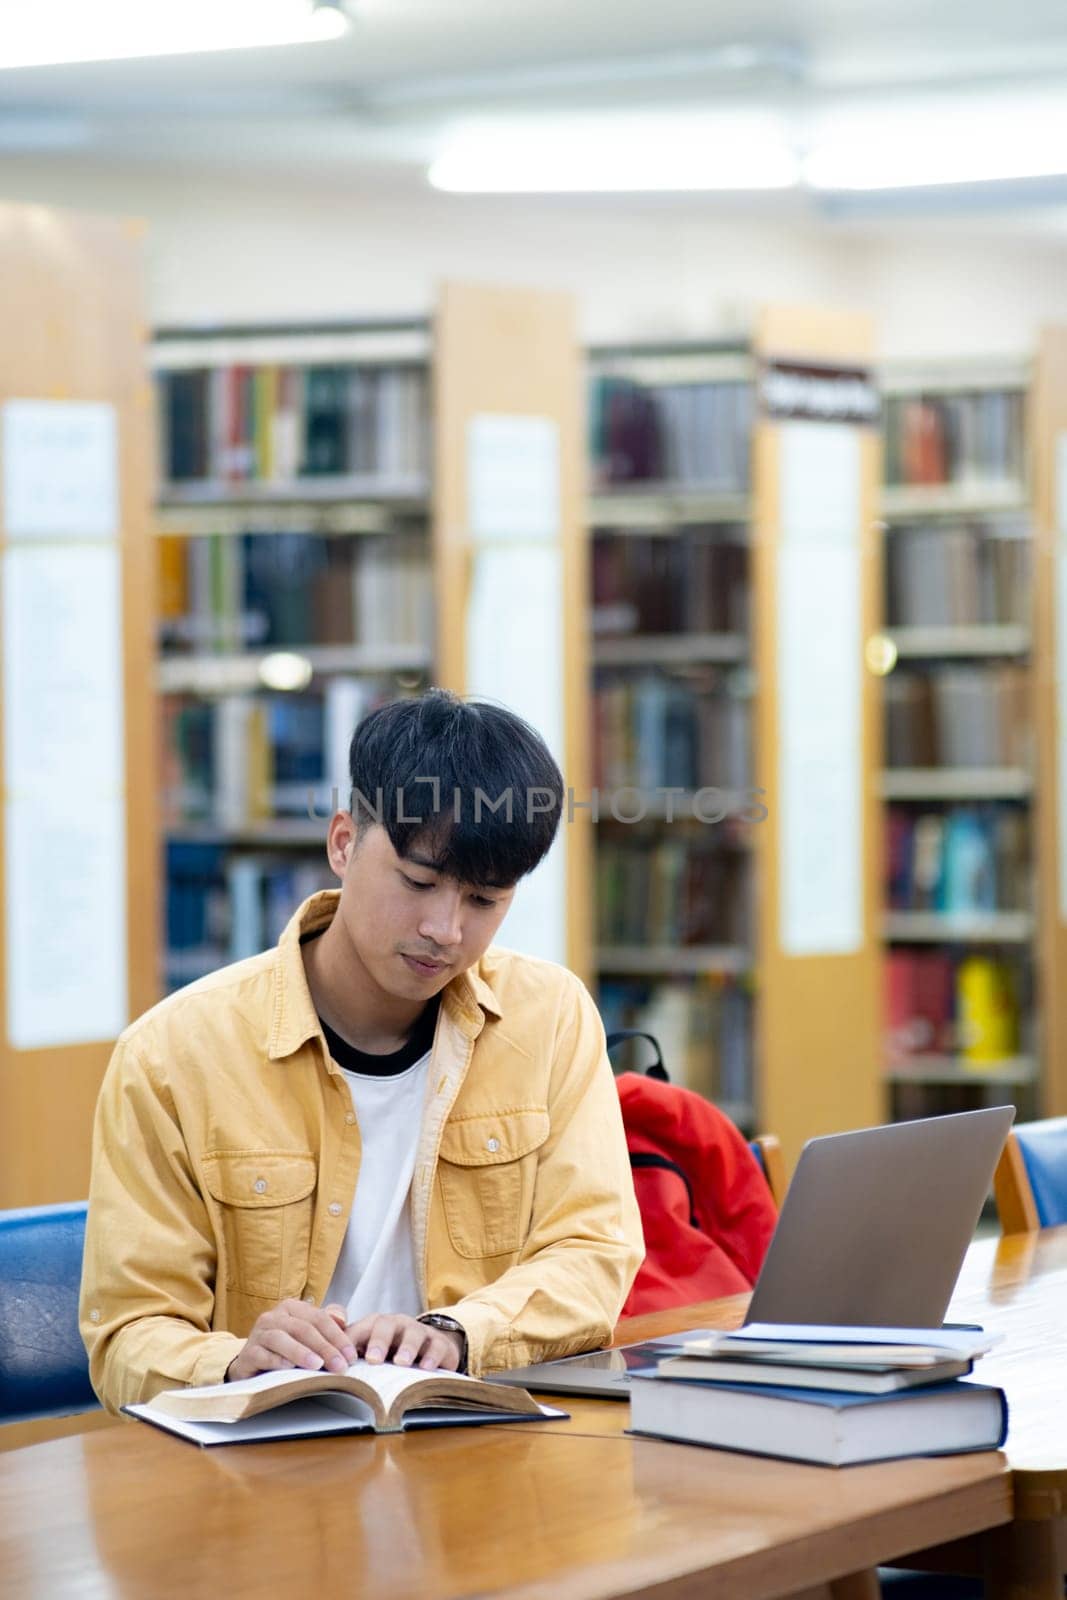 A young man is sitting at a table in a library, reading a book and using a laptop. Concept of focus and concentration, as the man is engaged in his studies. The library setting suggests a quiet